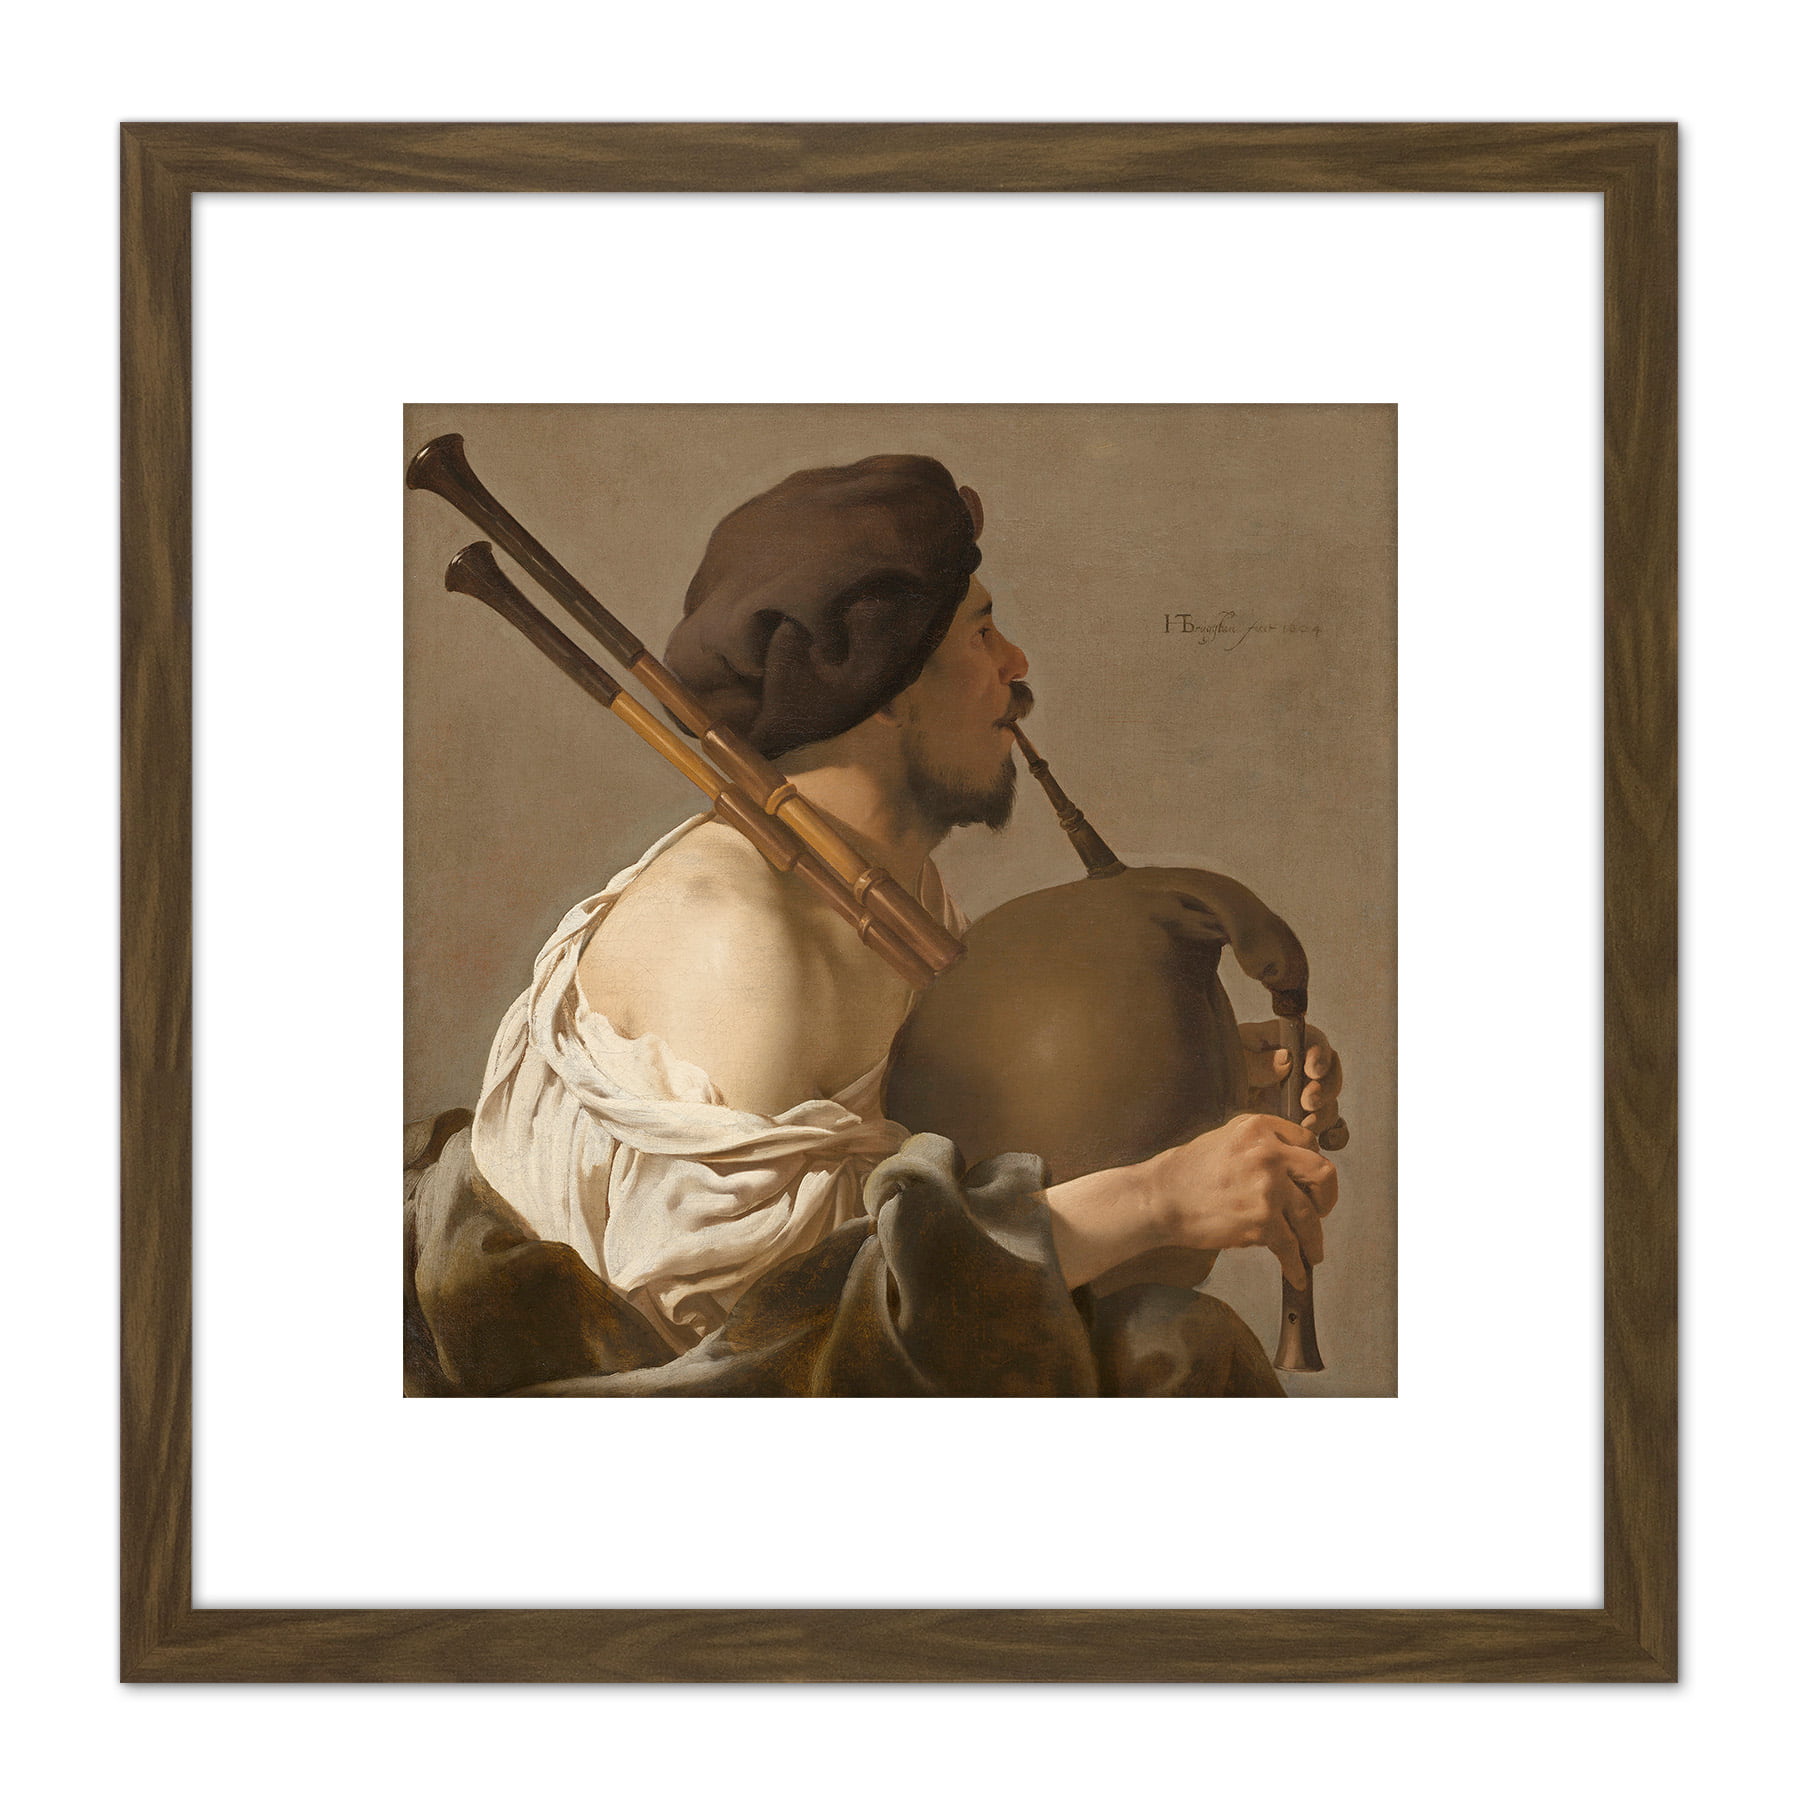 Brugghen Bagpipe Player Painting 8X8 Inch Square Wooden Framed Wall Art ...